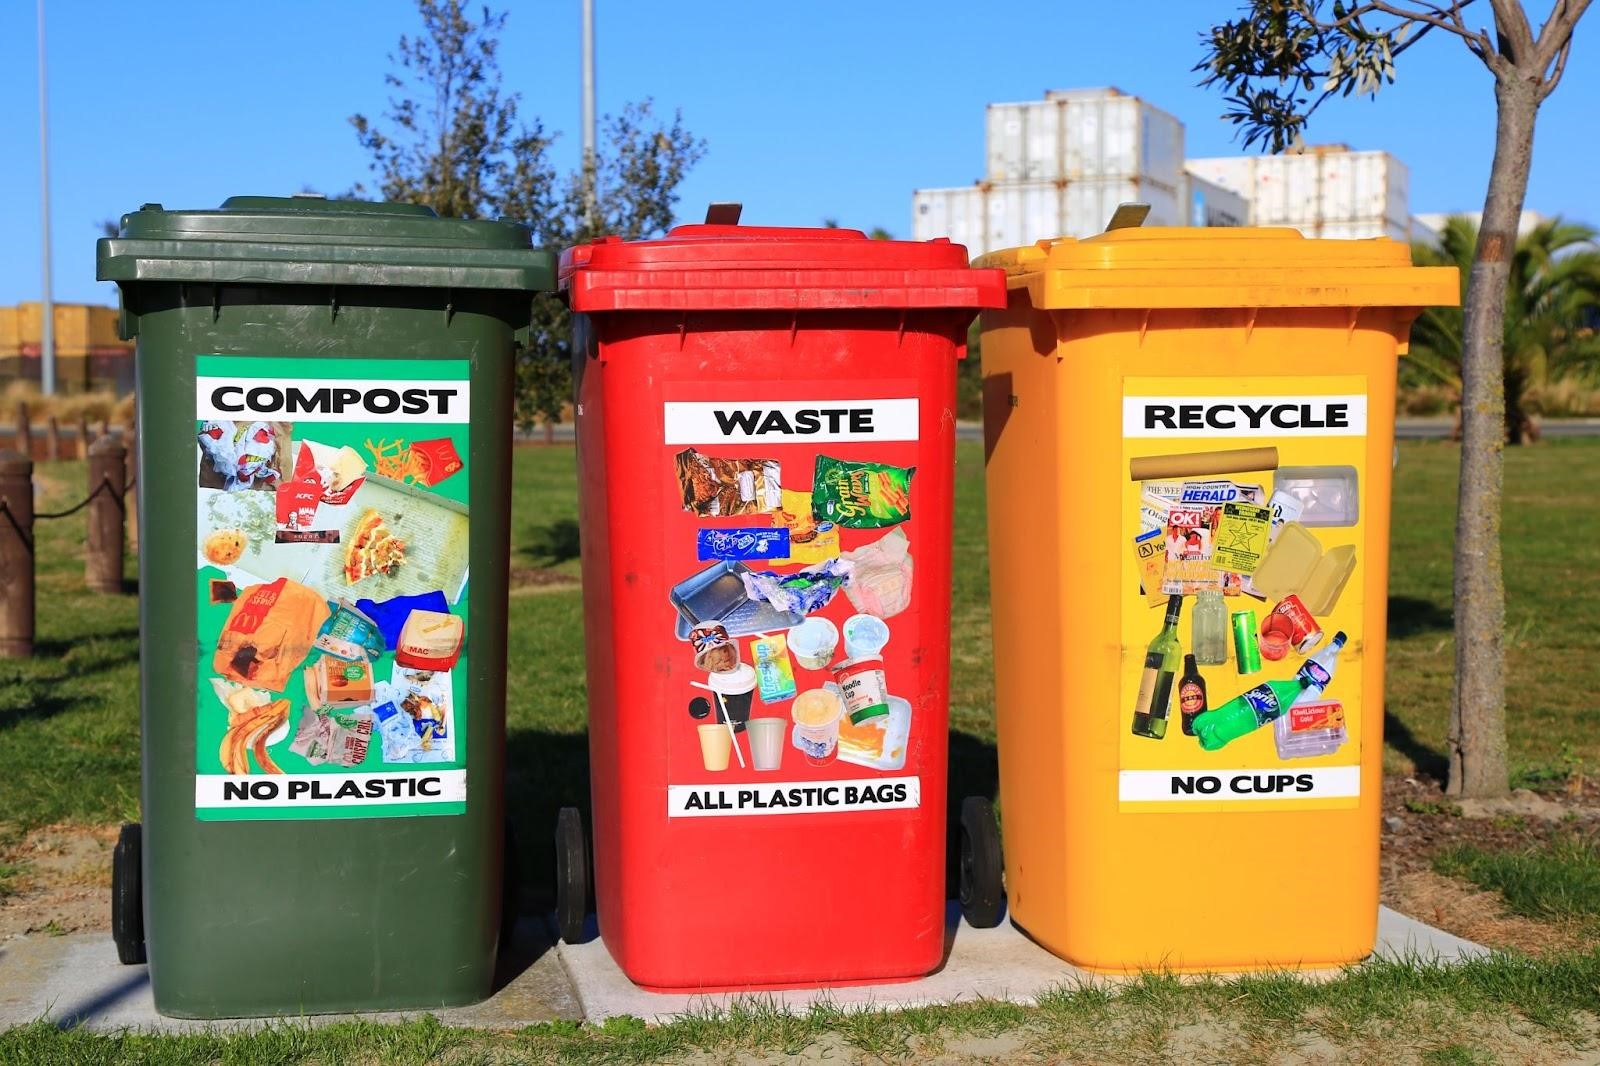 Three bins dedicated for compost - no plastic, waste - all plastic bags, and recycle - no cups, located in a public place